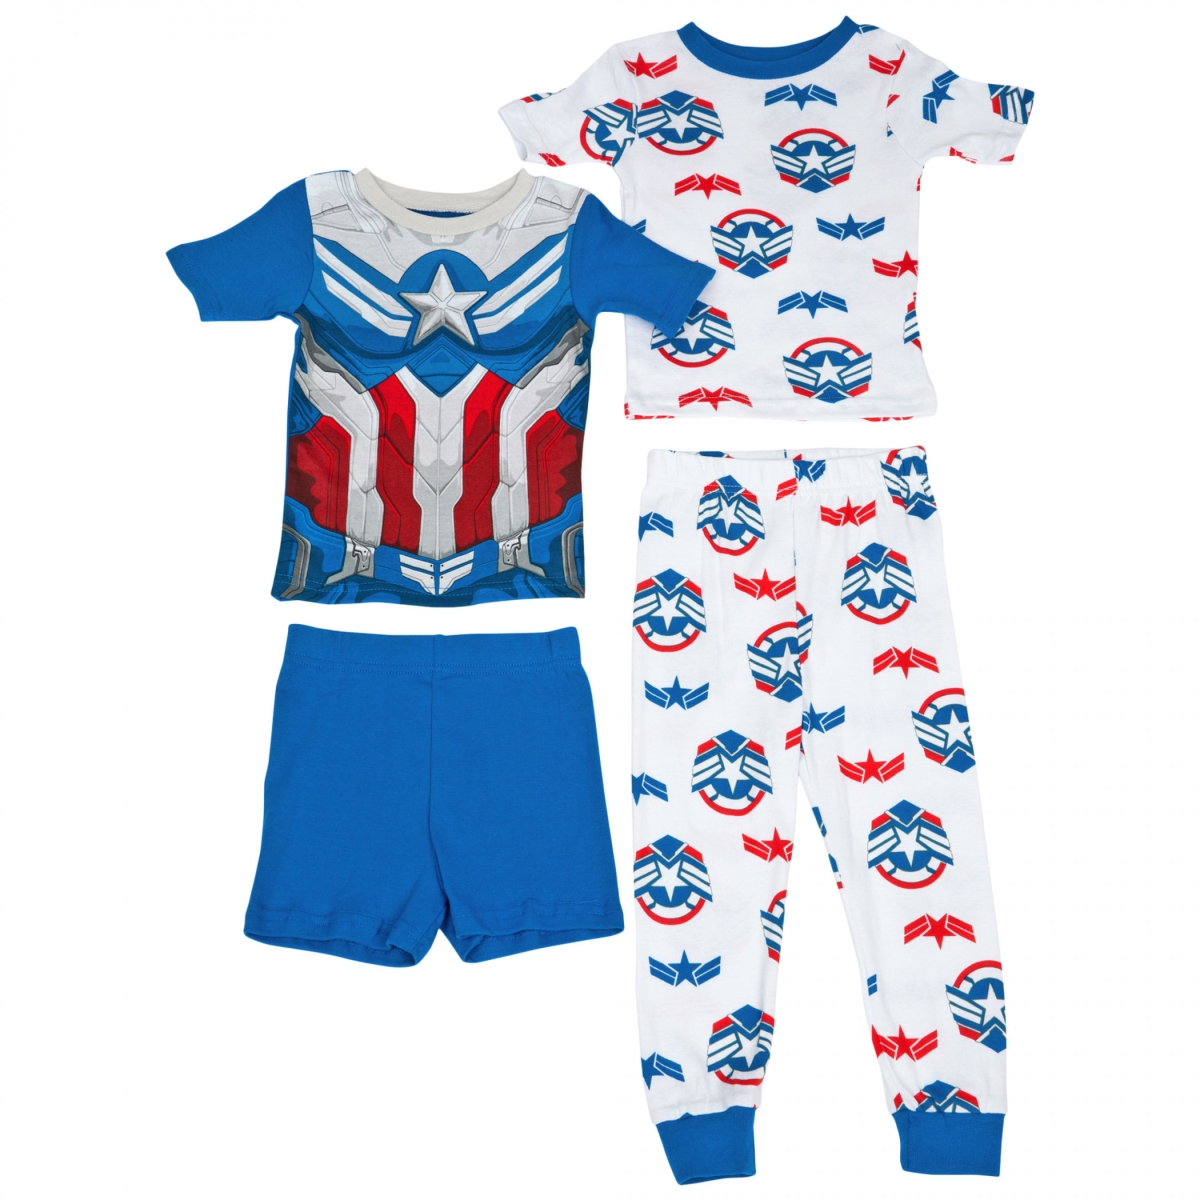 Picture of Captain America 838712-size10 Captain America Youth Shirts Shorts & Pants Set - Size 10 - 4 Piece